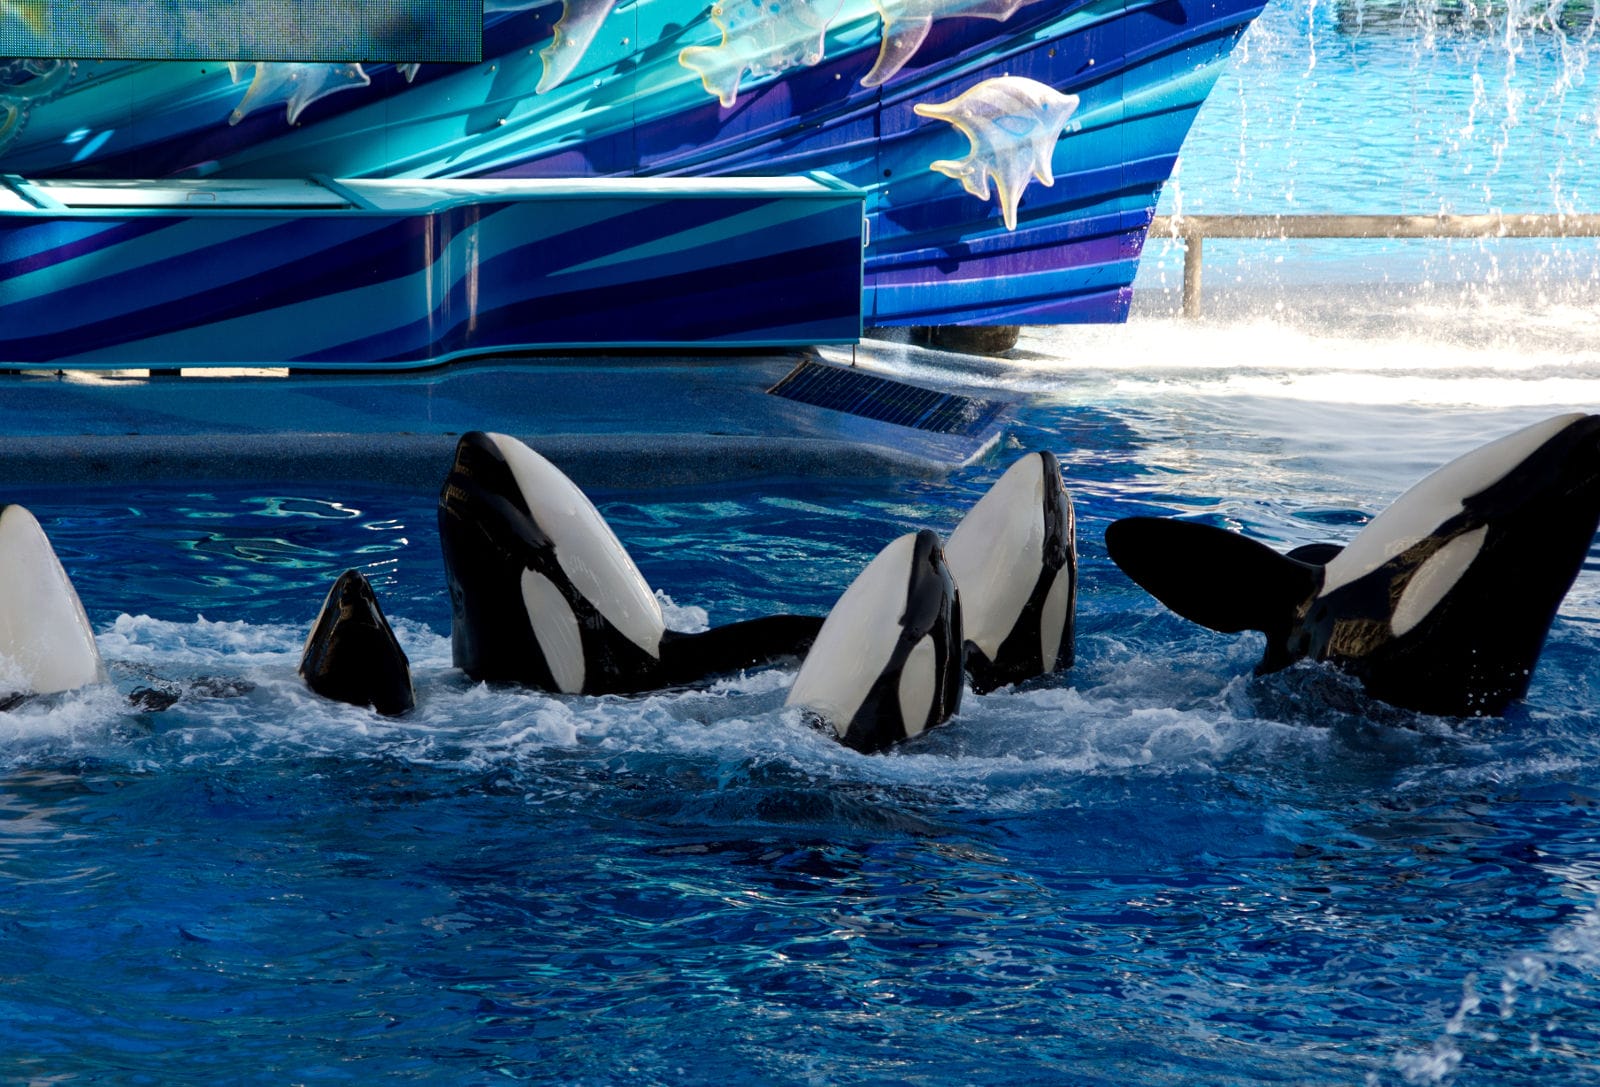 10 Things Dolphins and Orcas Would Tell Us About Life in Captivity